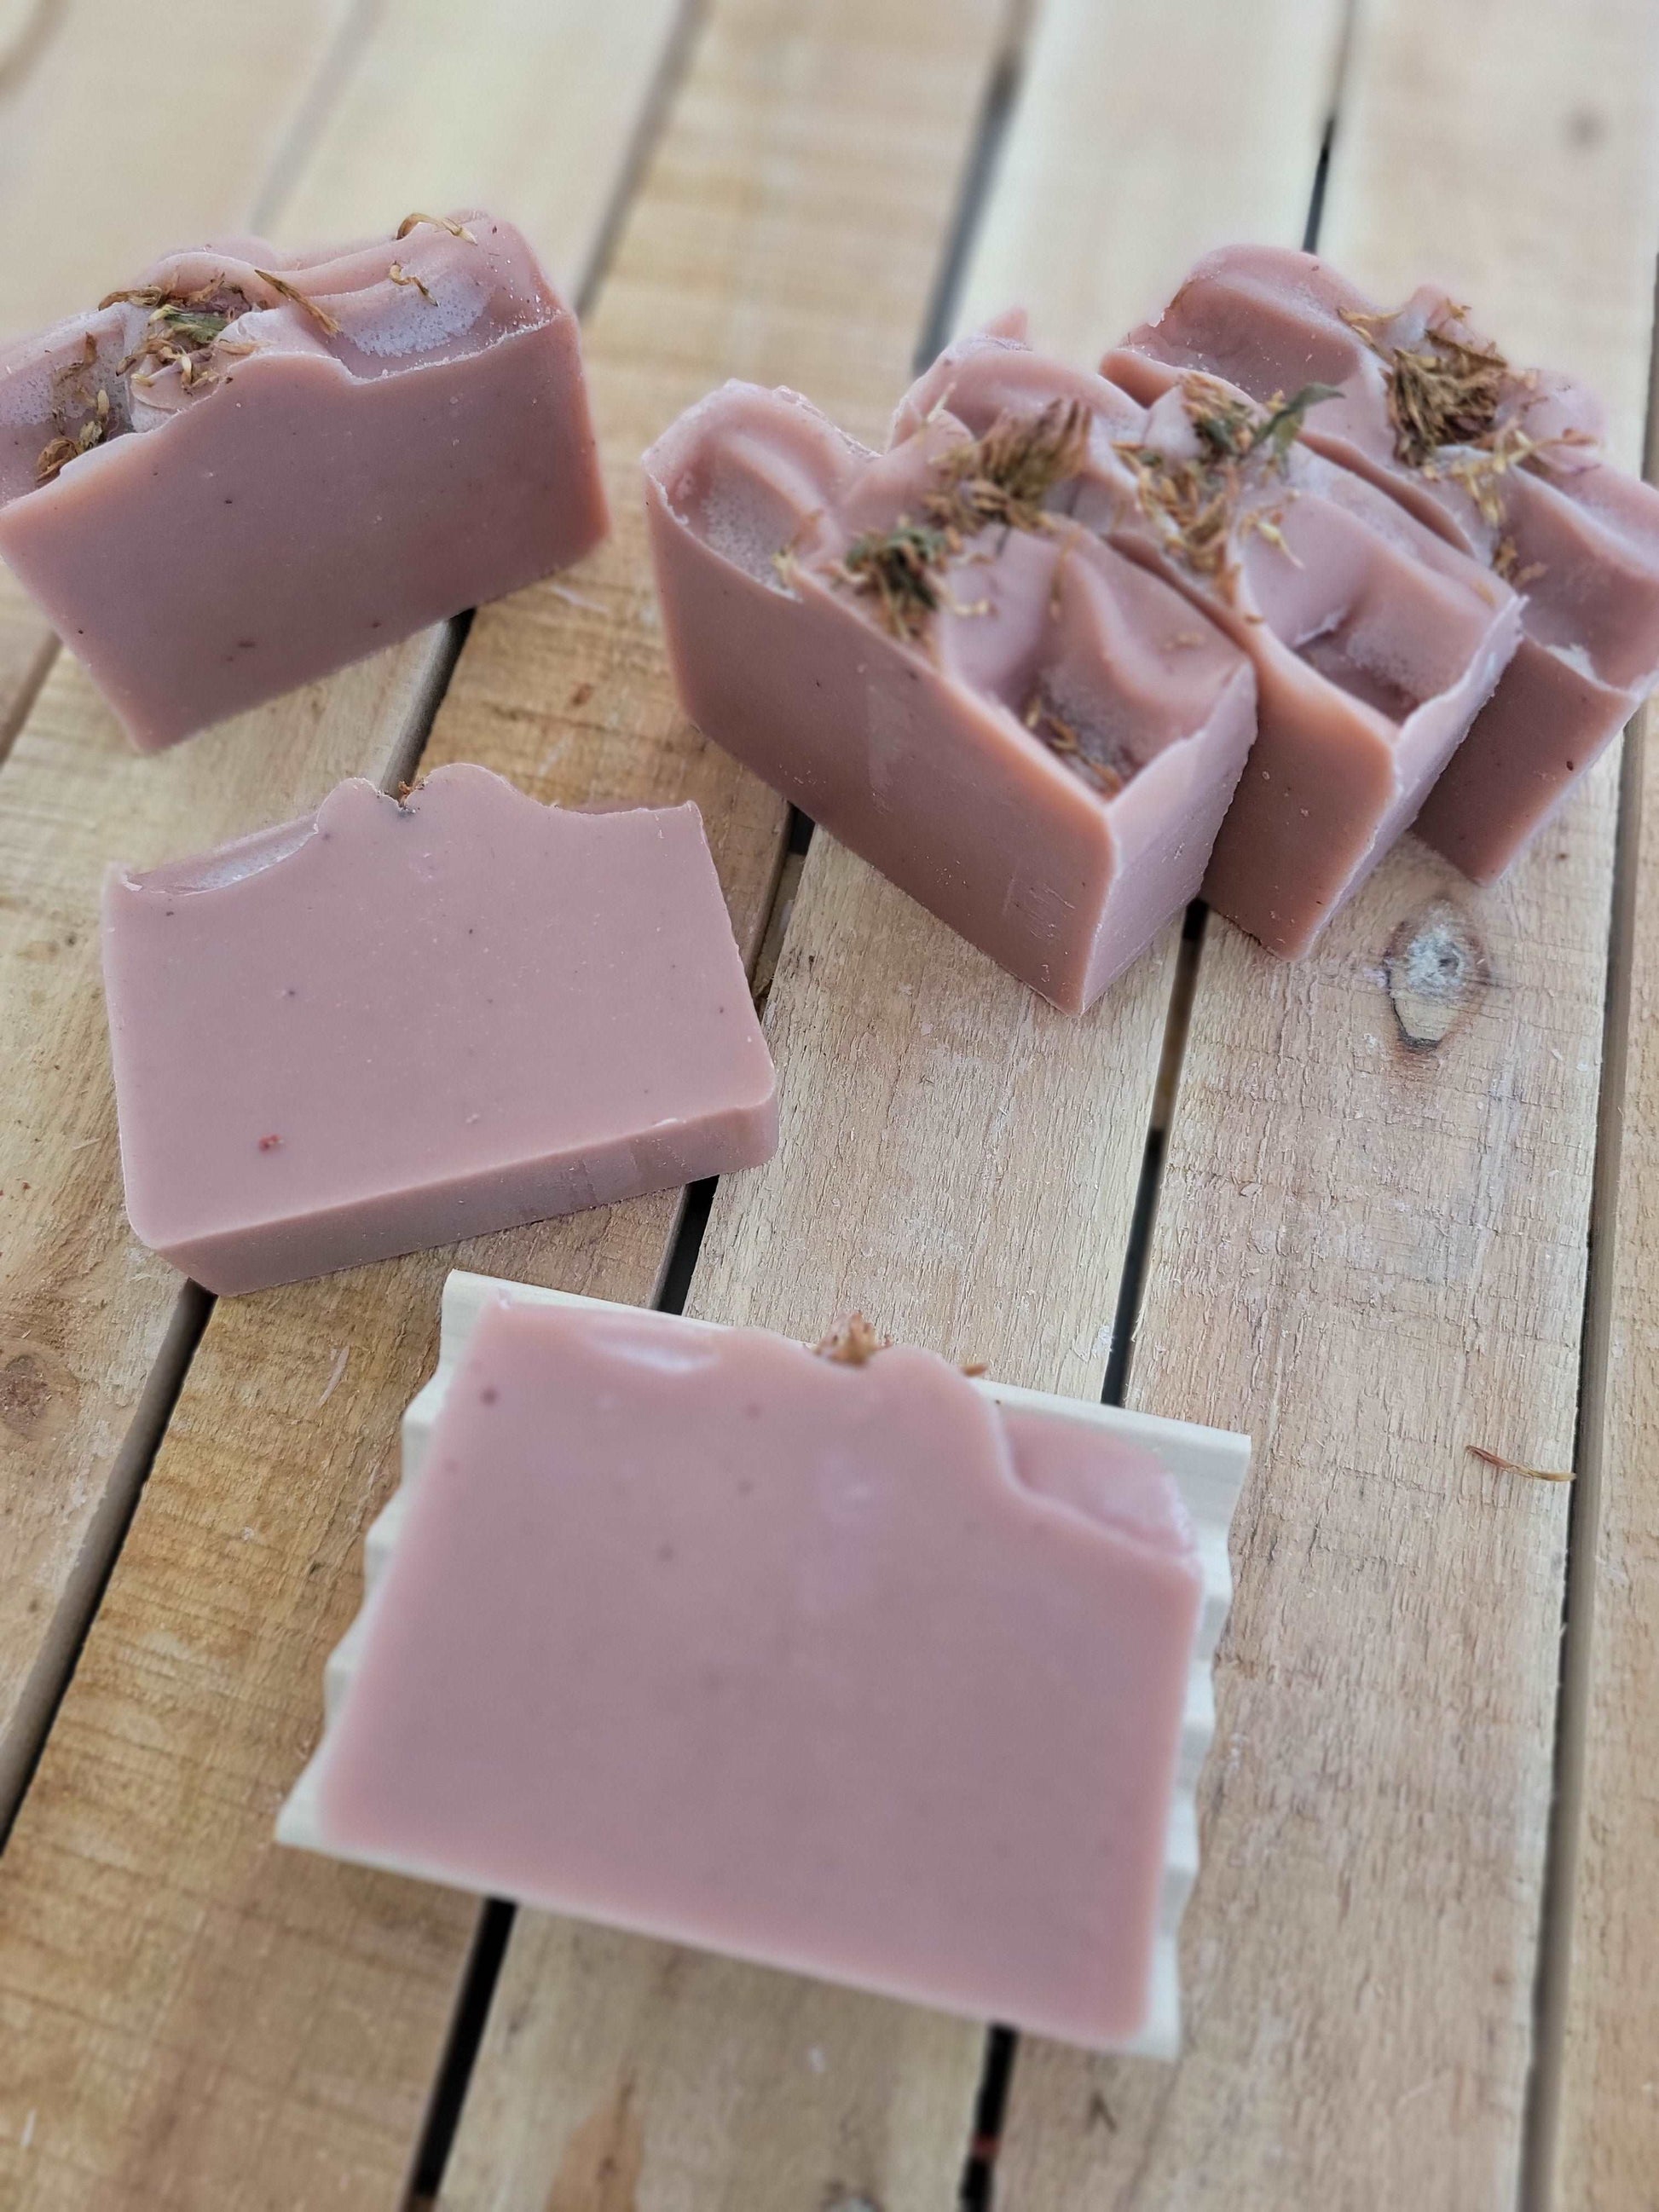 Patchouli with Rose Clay Soap | Handmade and Natural | Sunflower Soaps